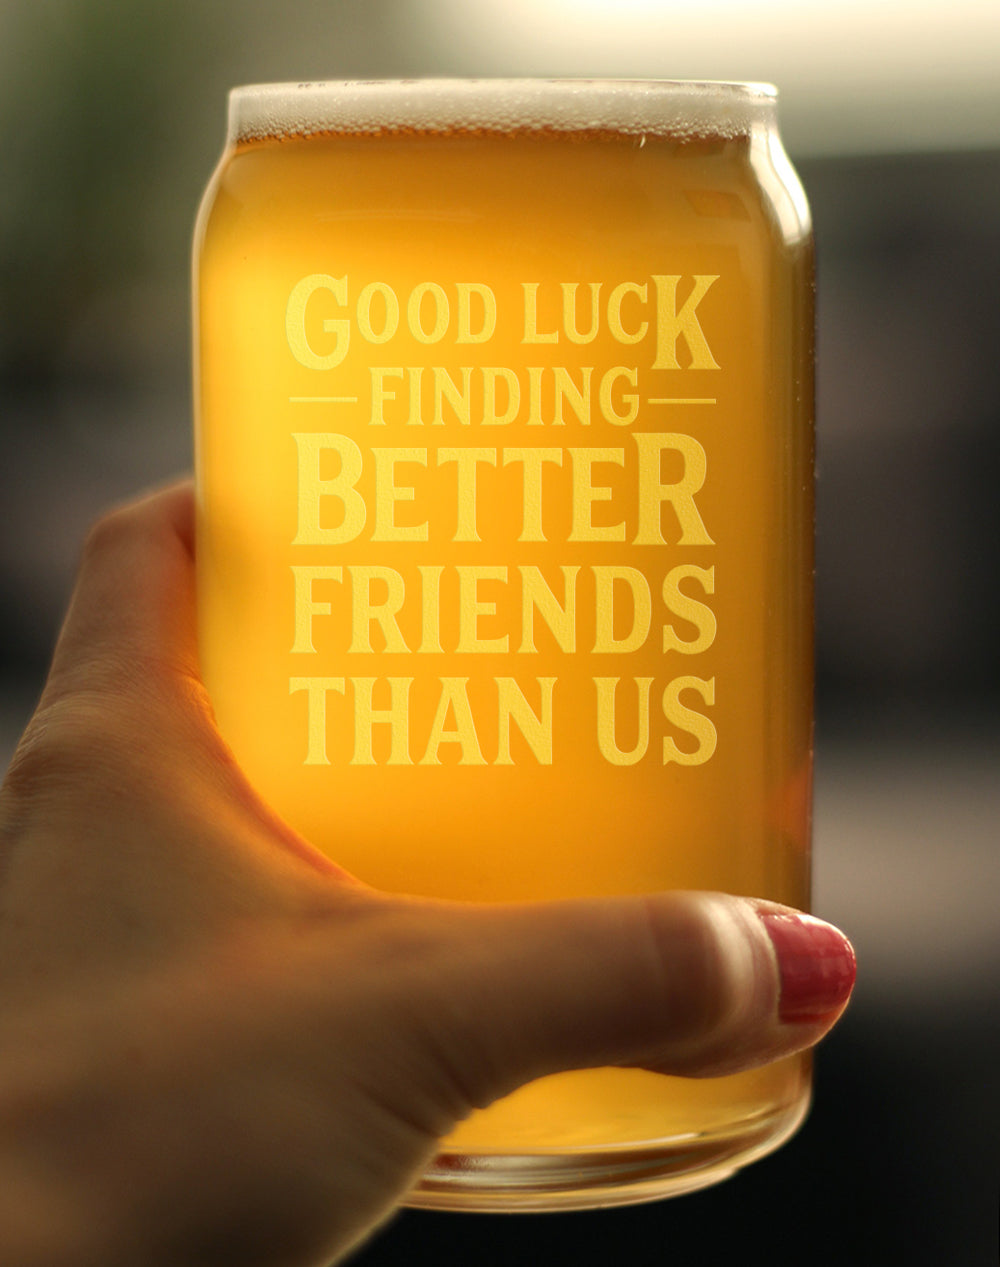 Good Luck Finding Better Friends Than Us - Beer Can Pint Glass - Funny Farewell Gift For Best Friend Moving Away - 16 oz Glasses